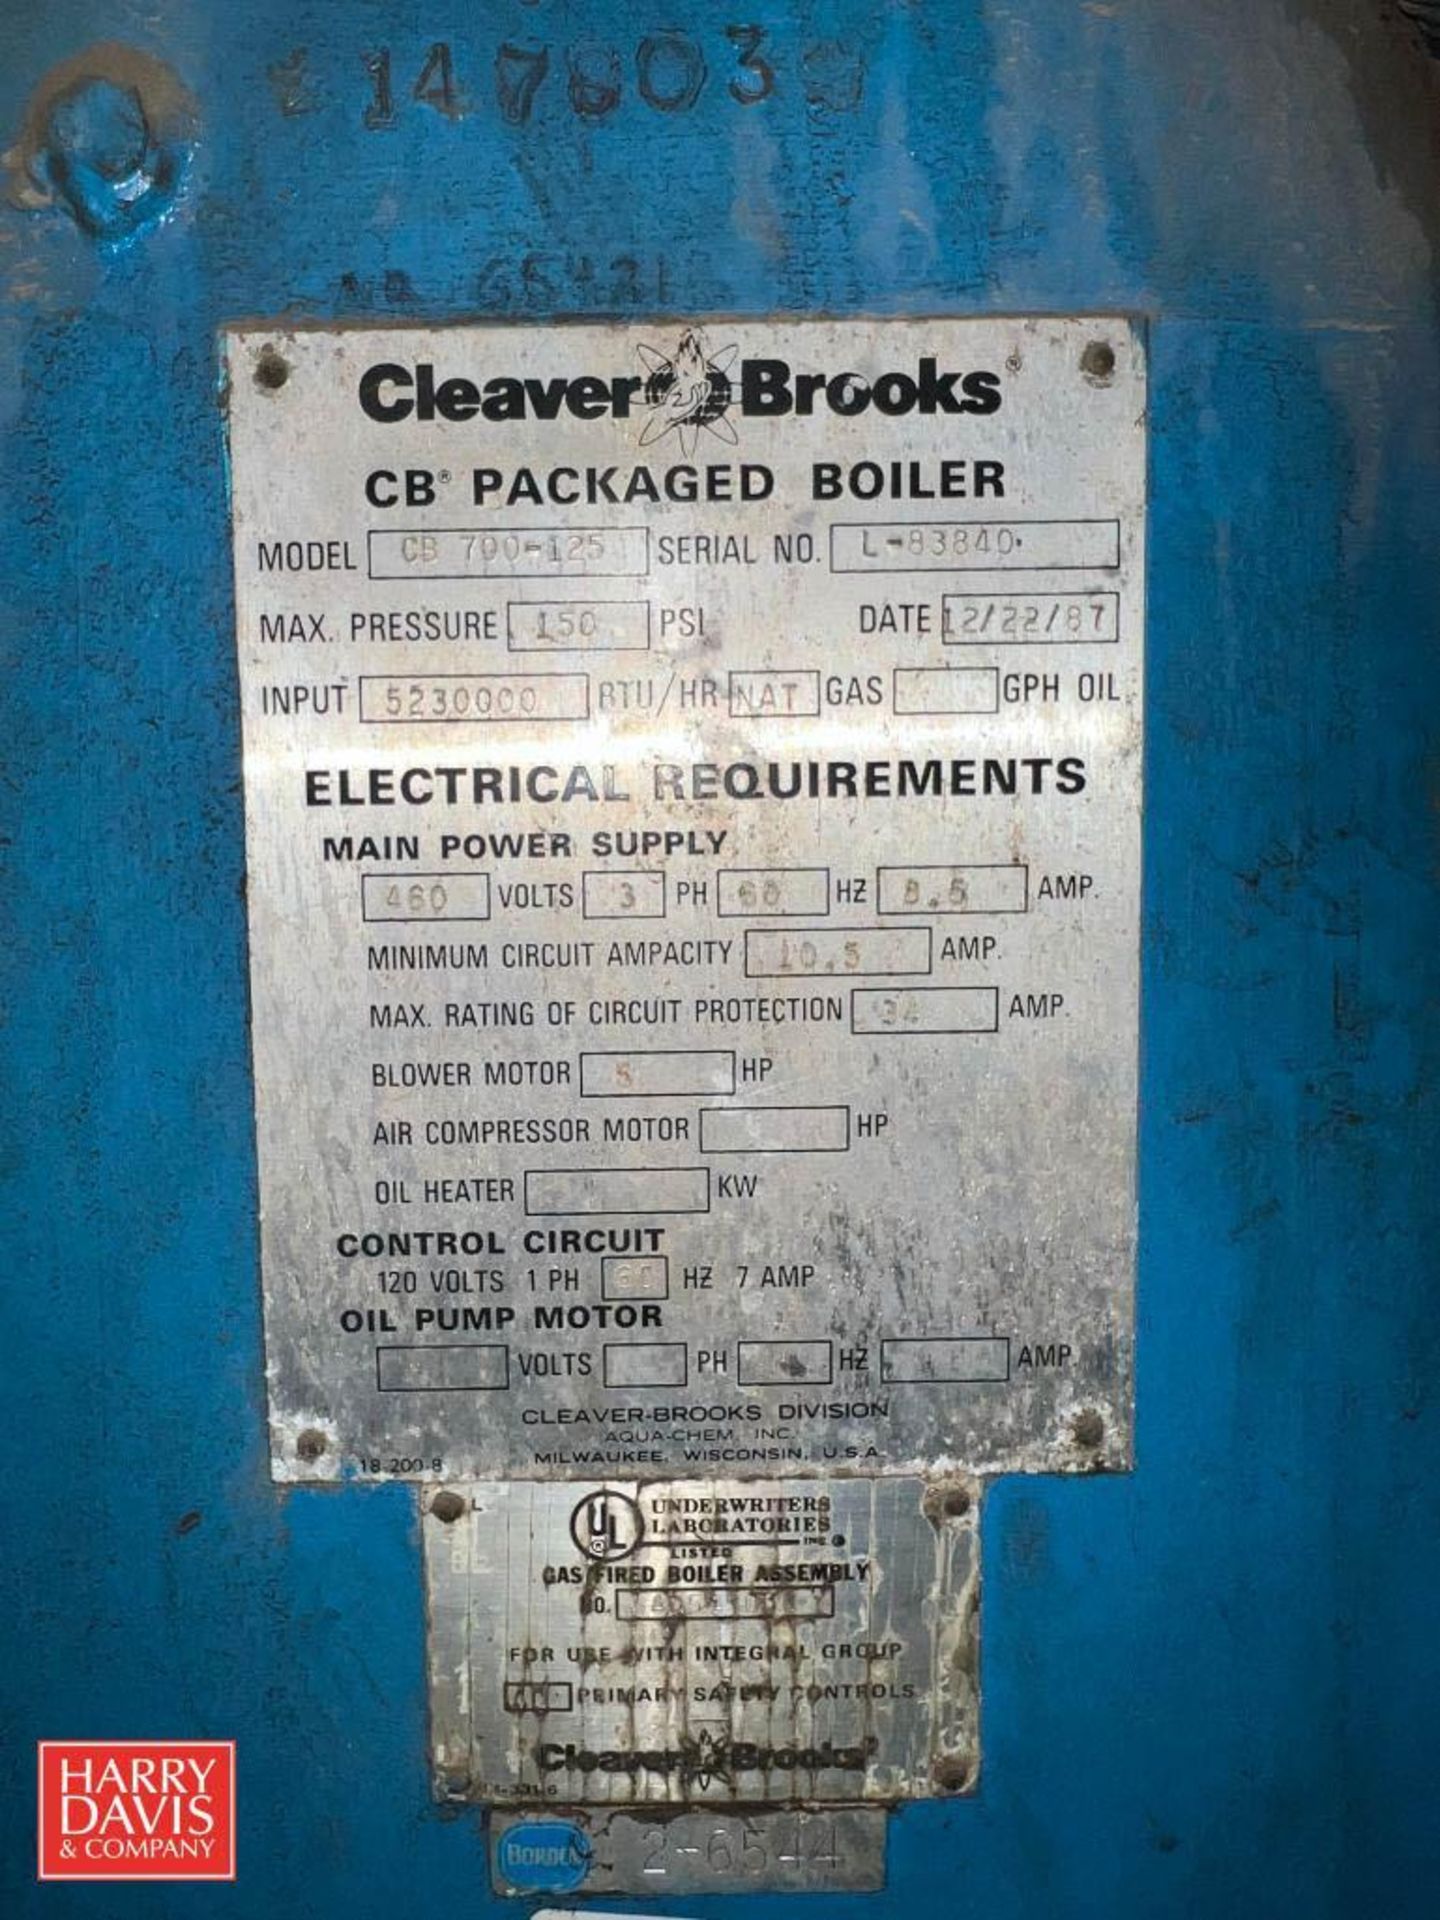 Cleaver Brooks 150 PSI Natural Gas CB Packaged Boiler, Model: CB700-125, S/N: L-83840 with Honeywell - Image 5 of 6